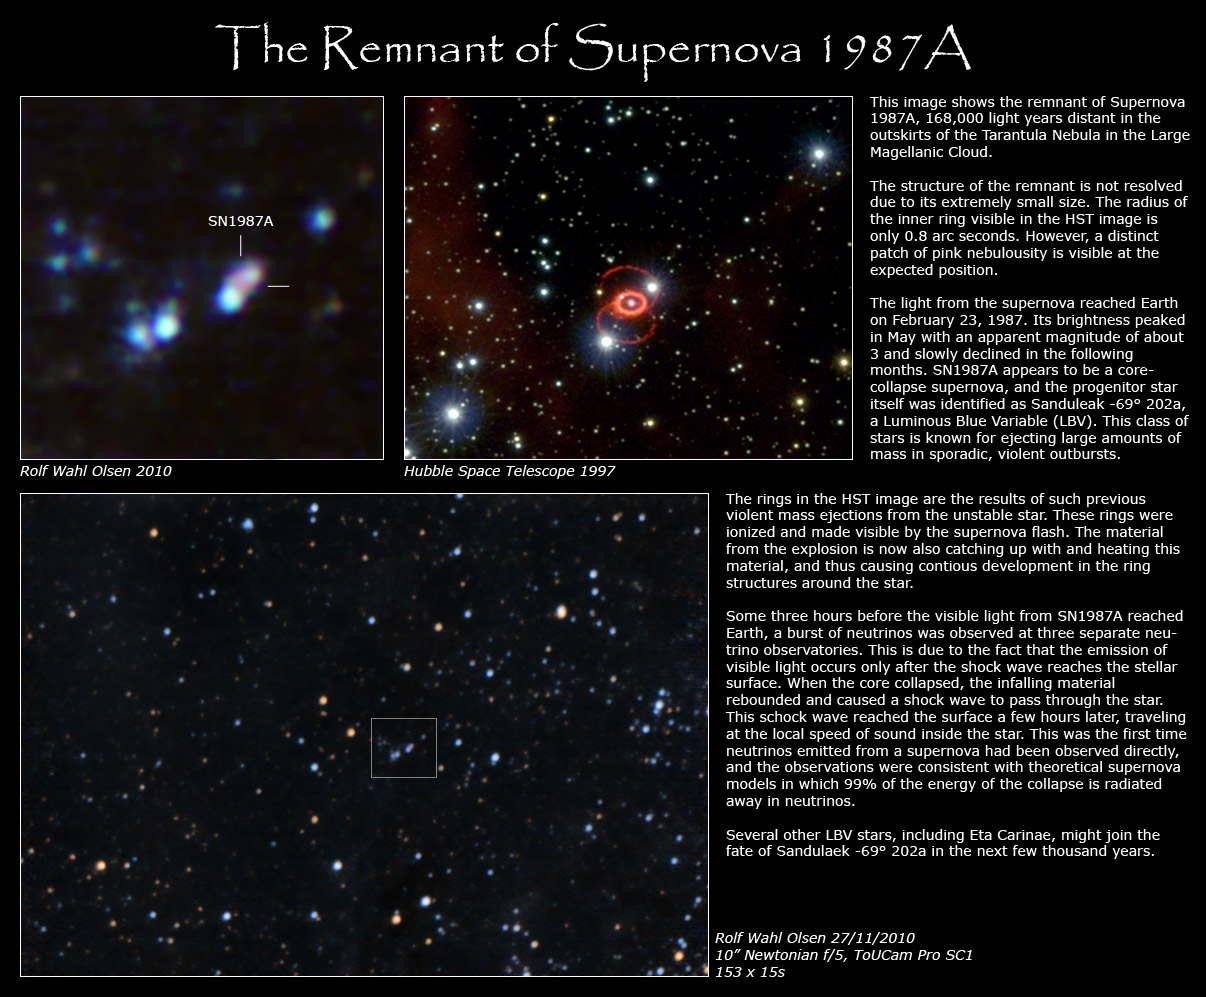 The Remnant of Supernova 1987A